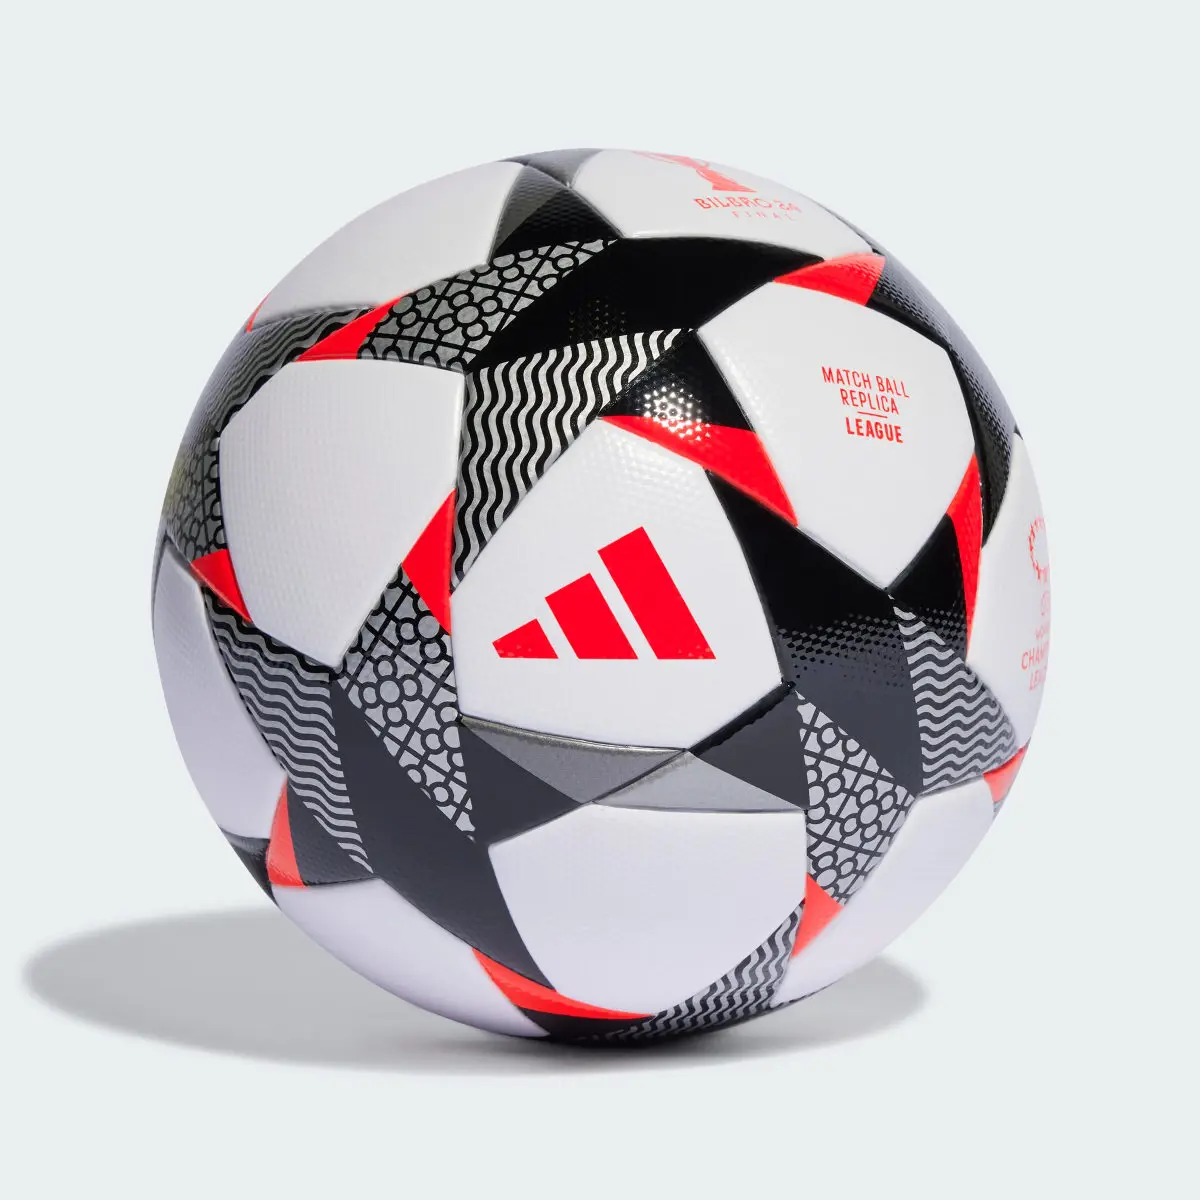 Adidas UWCL League 23/24 Knock-out Ball. 2